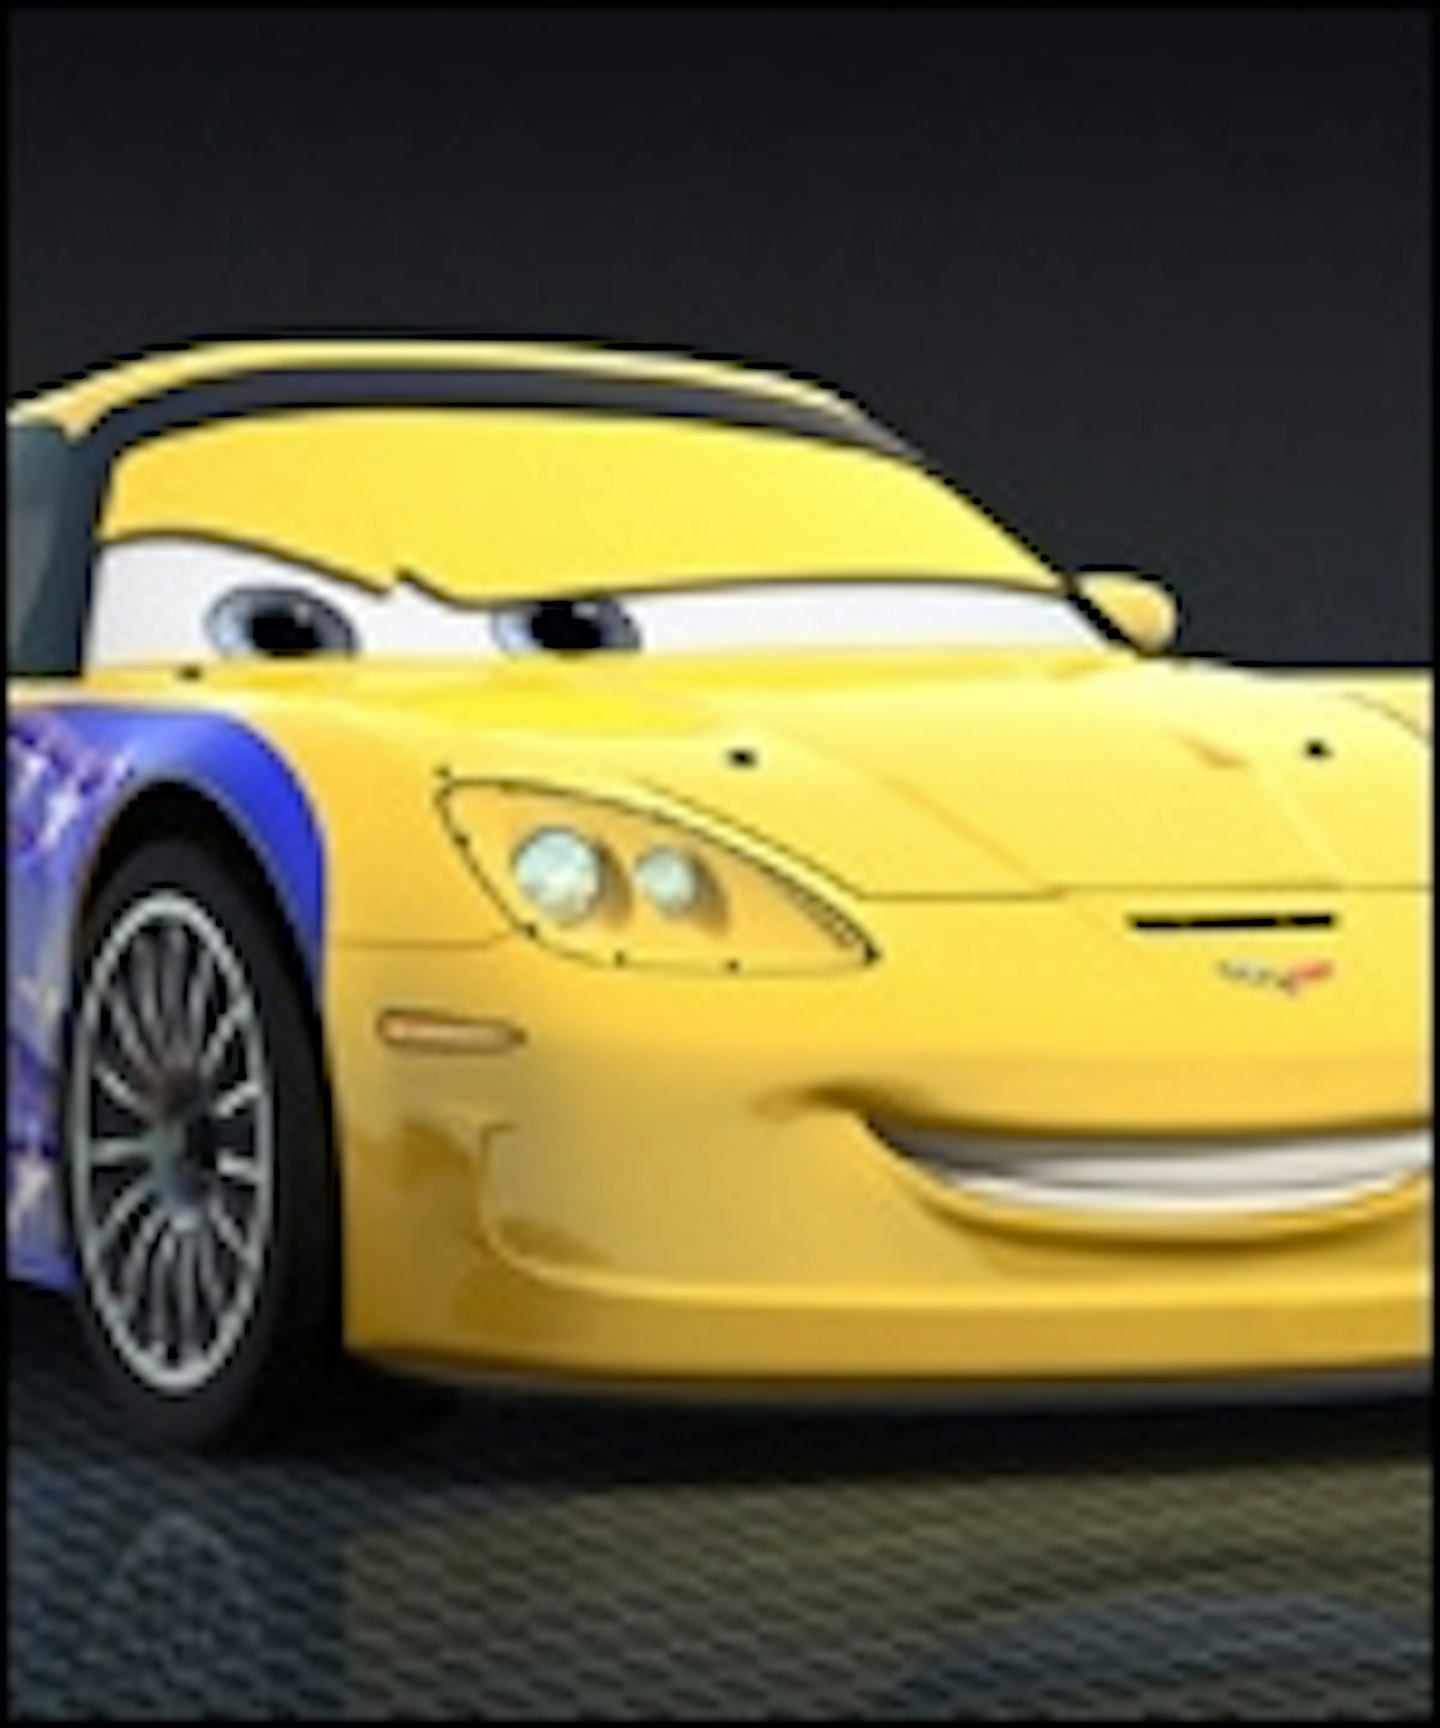 Two More Cars 2 Characters Arrive 